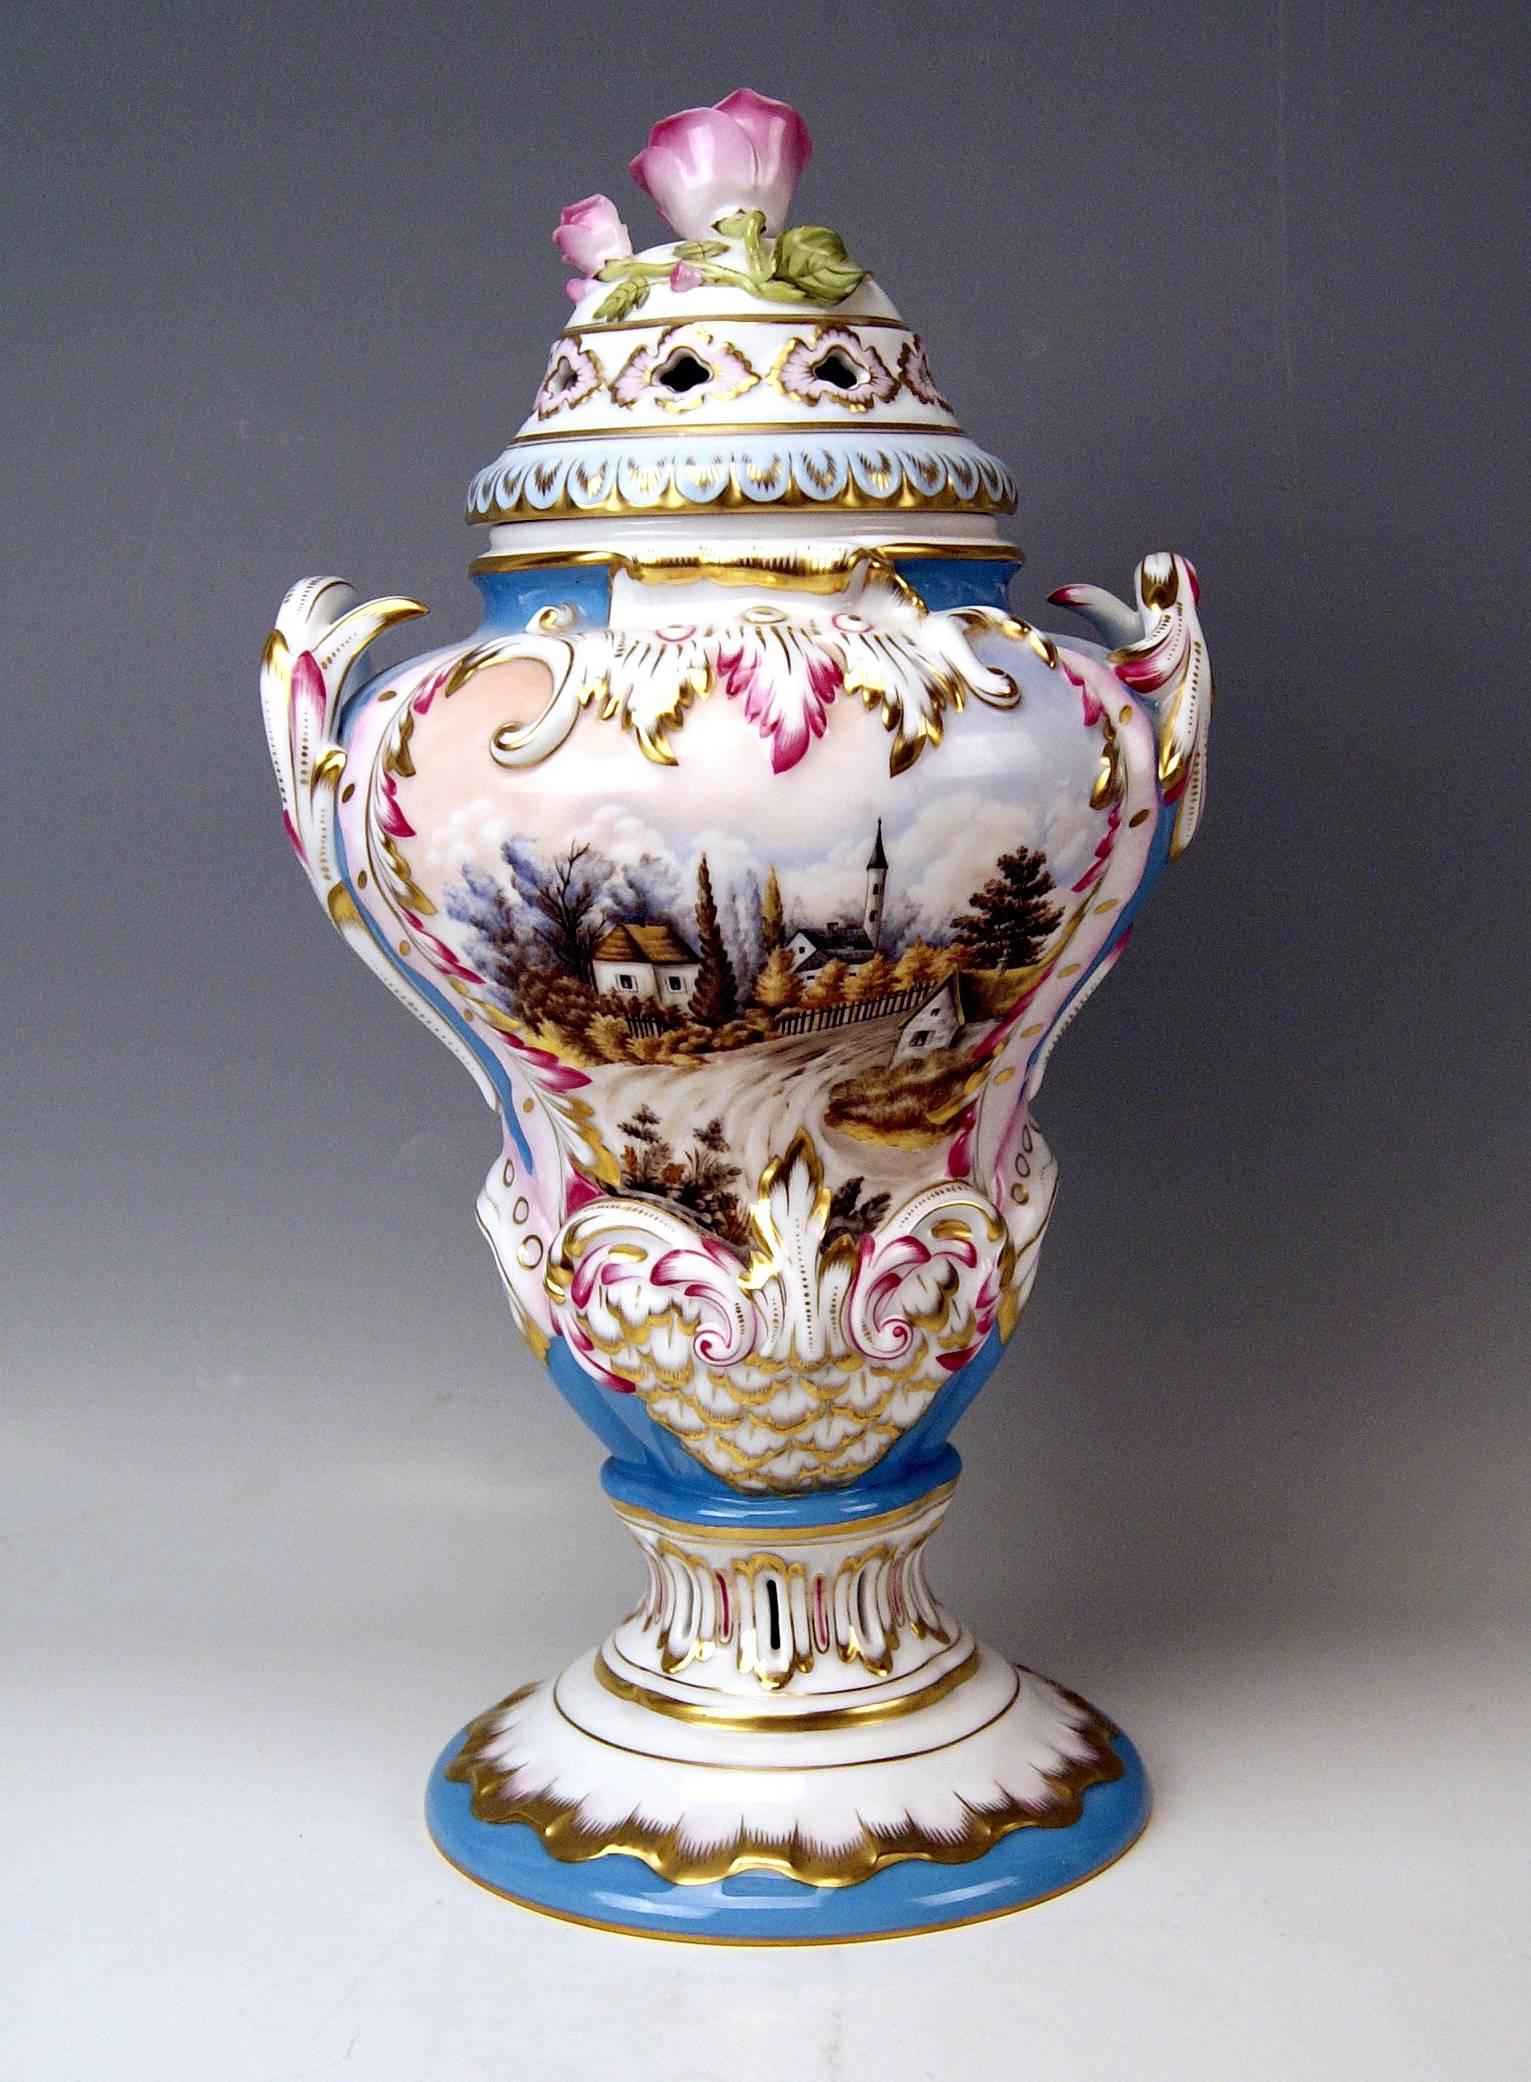 Lidded nicest bellied and two-handled rarest herend vase with stunning picture paintings made by István Lázár (born in year 1967 in Zalaegerszeg / Hungary. The Hungarian well-known porcelain painter is working since the year 1990 at the Special